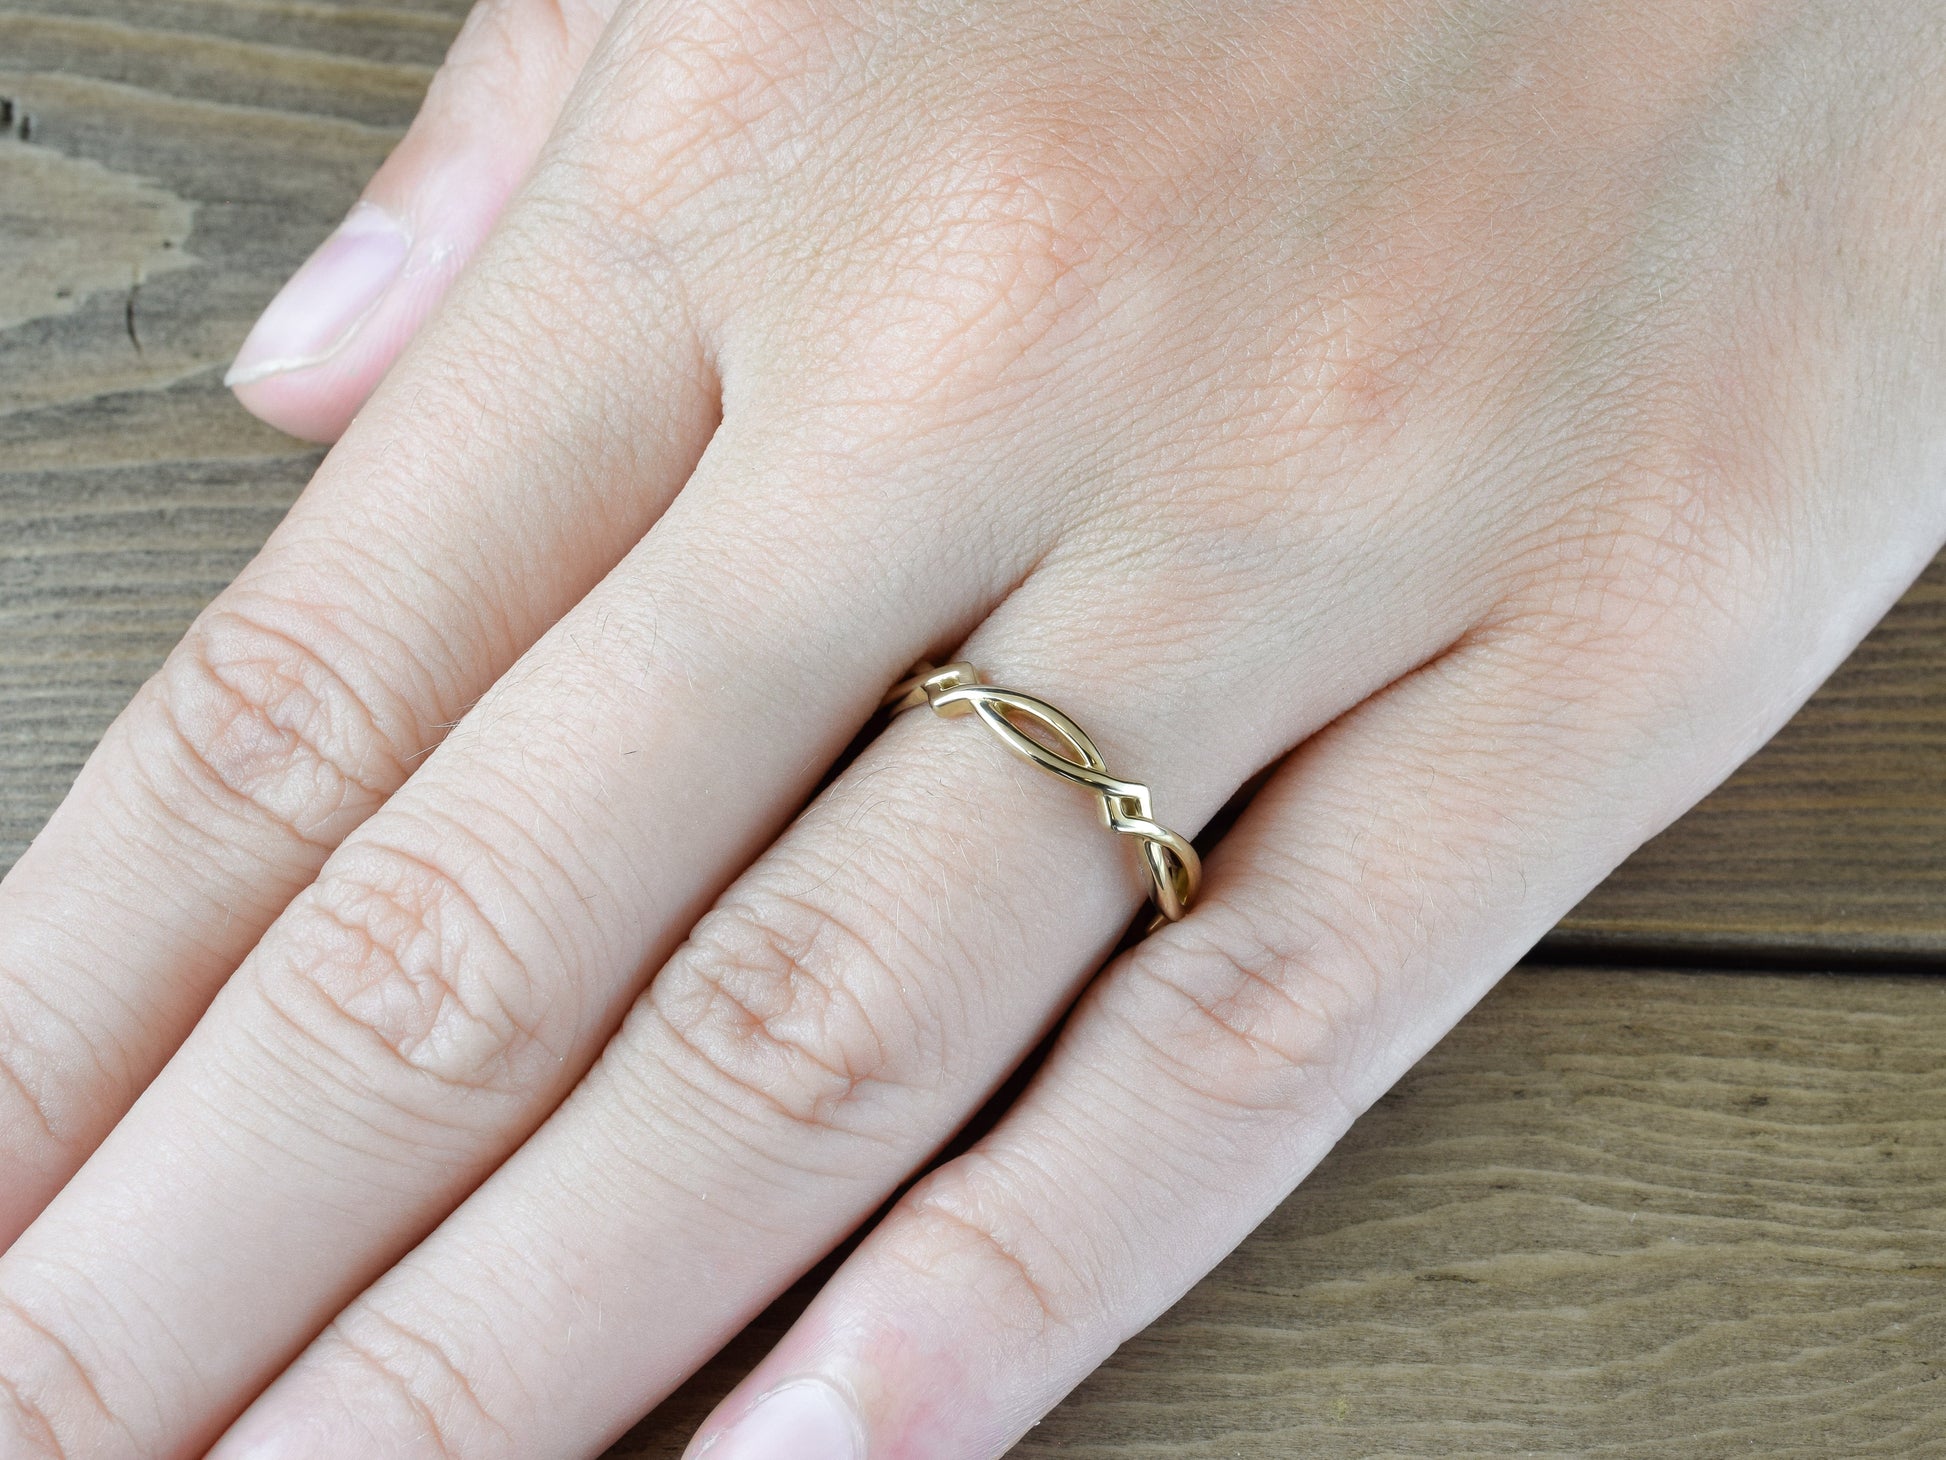 Woven gold band - A Celtic ring in yellow gold on finger